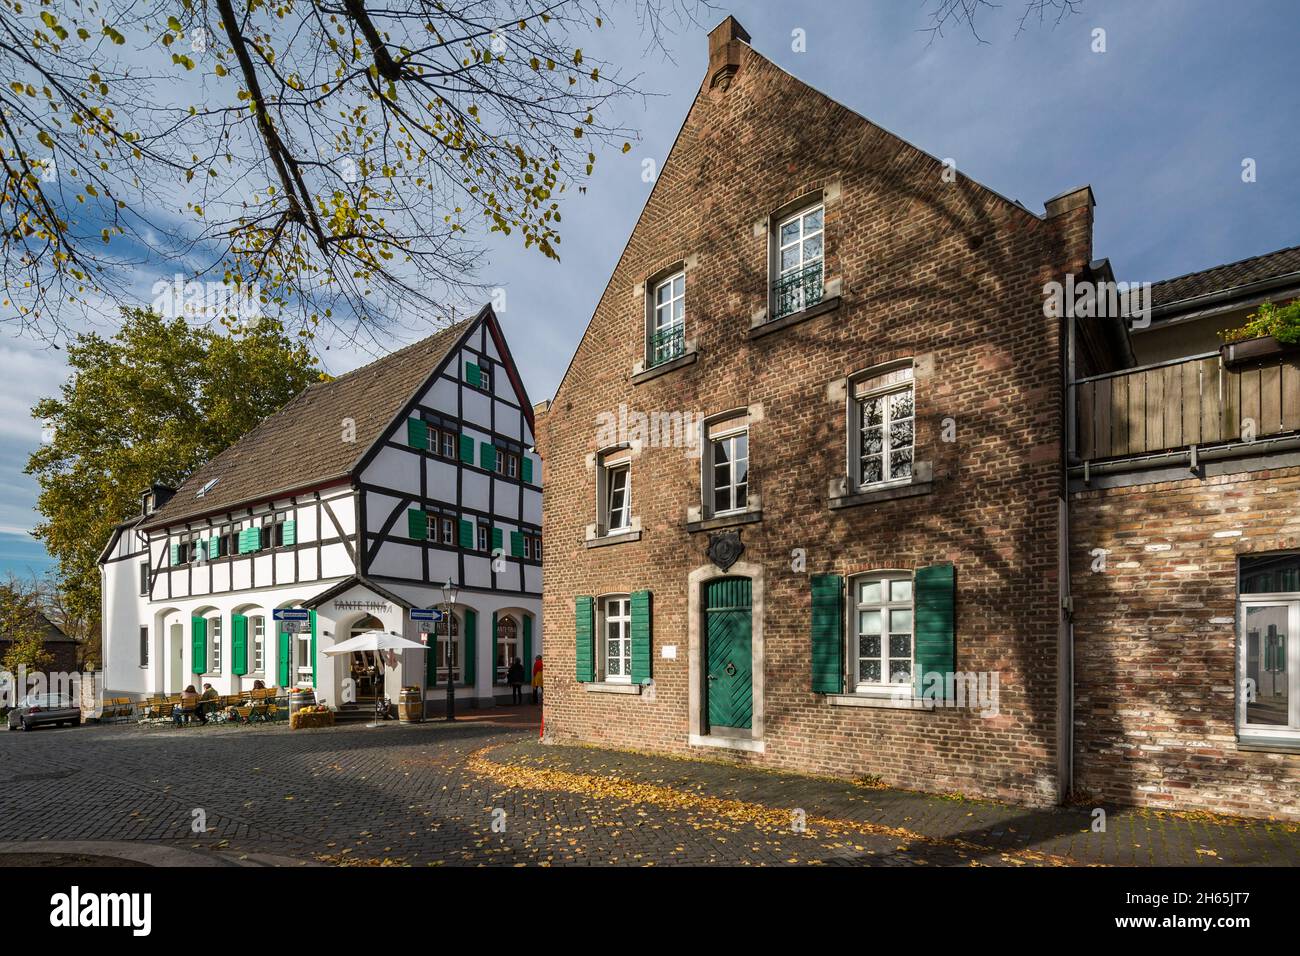 Germany, Monheim am Rhein, Rhine, Bergisches Land, Niederbergisches Land, Niederberg, Rhineland, North Rhine-Westphalia, NRW, Old City Hall in the historic downtown, former guest-house, brick building, left restaurant Tante Tina, half-timbered house with green shutters, trees with autumnal colouring Stock Photo